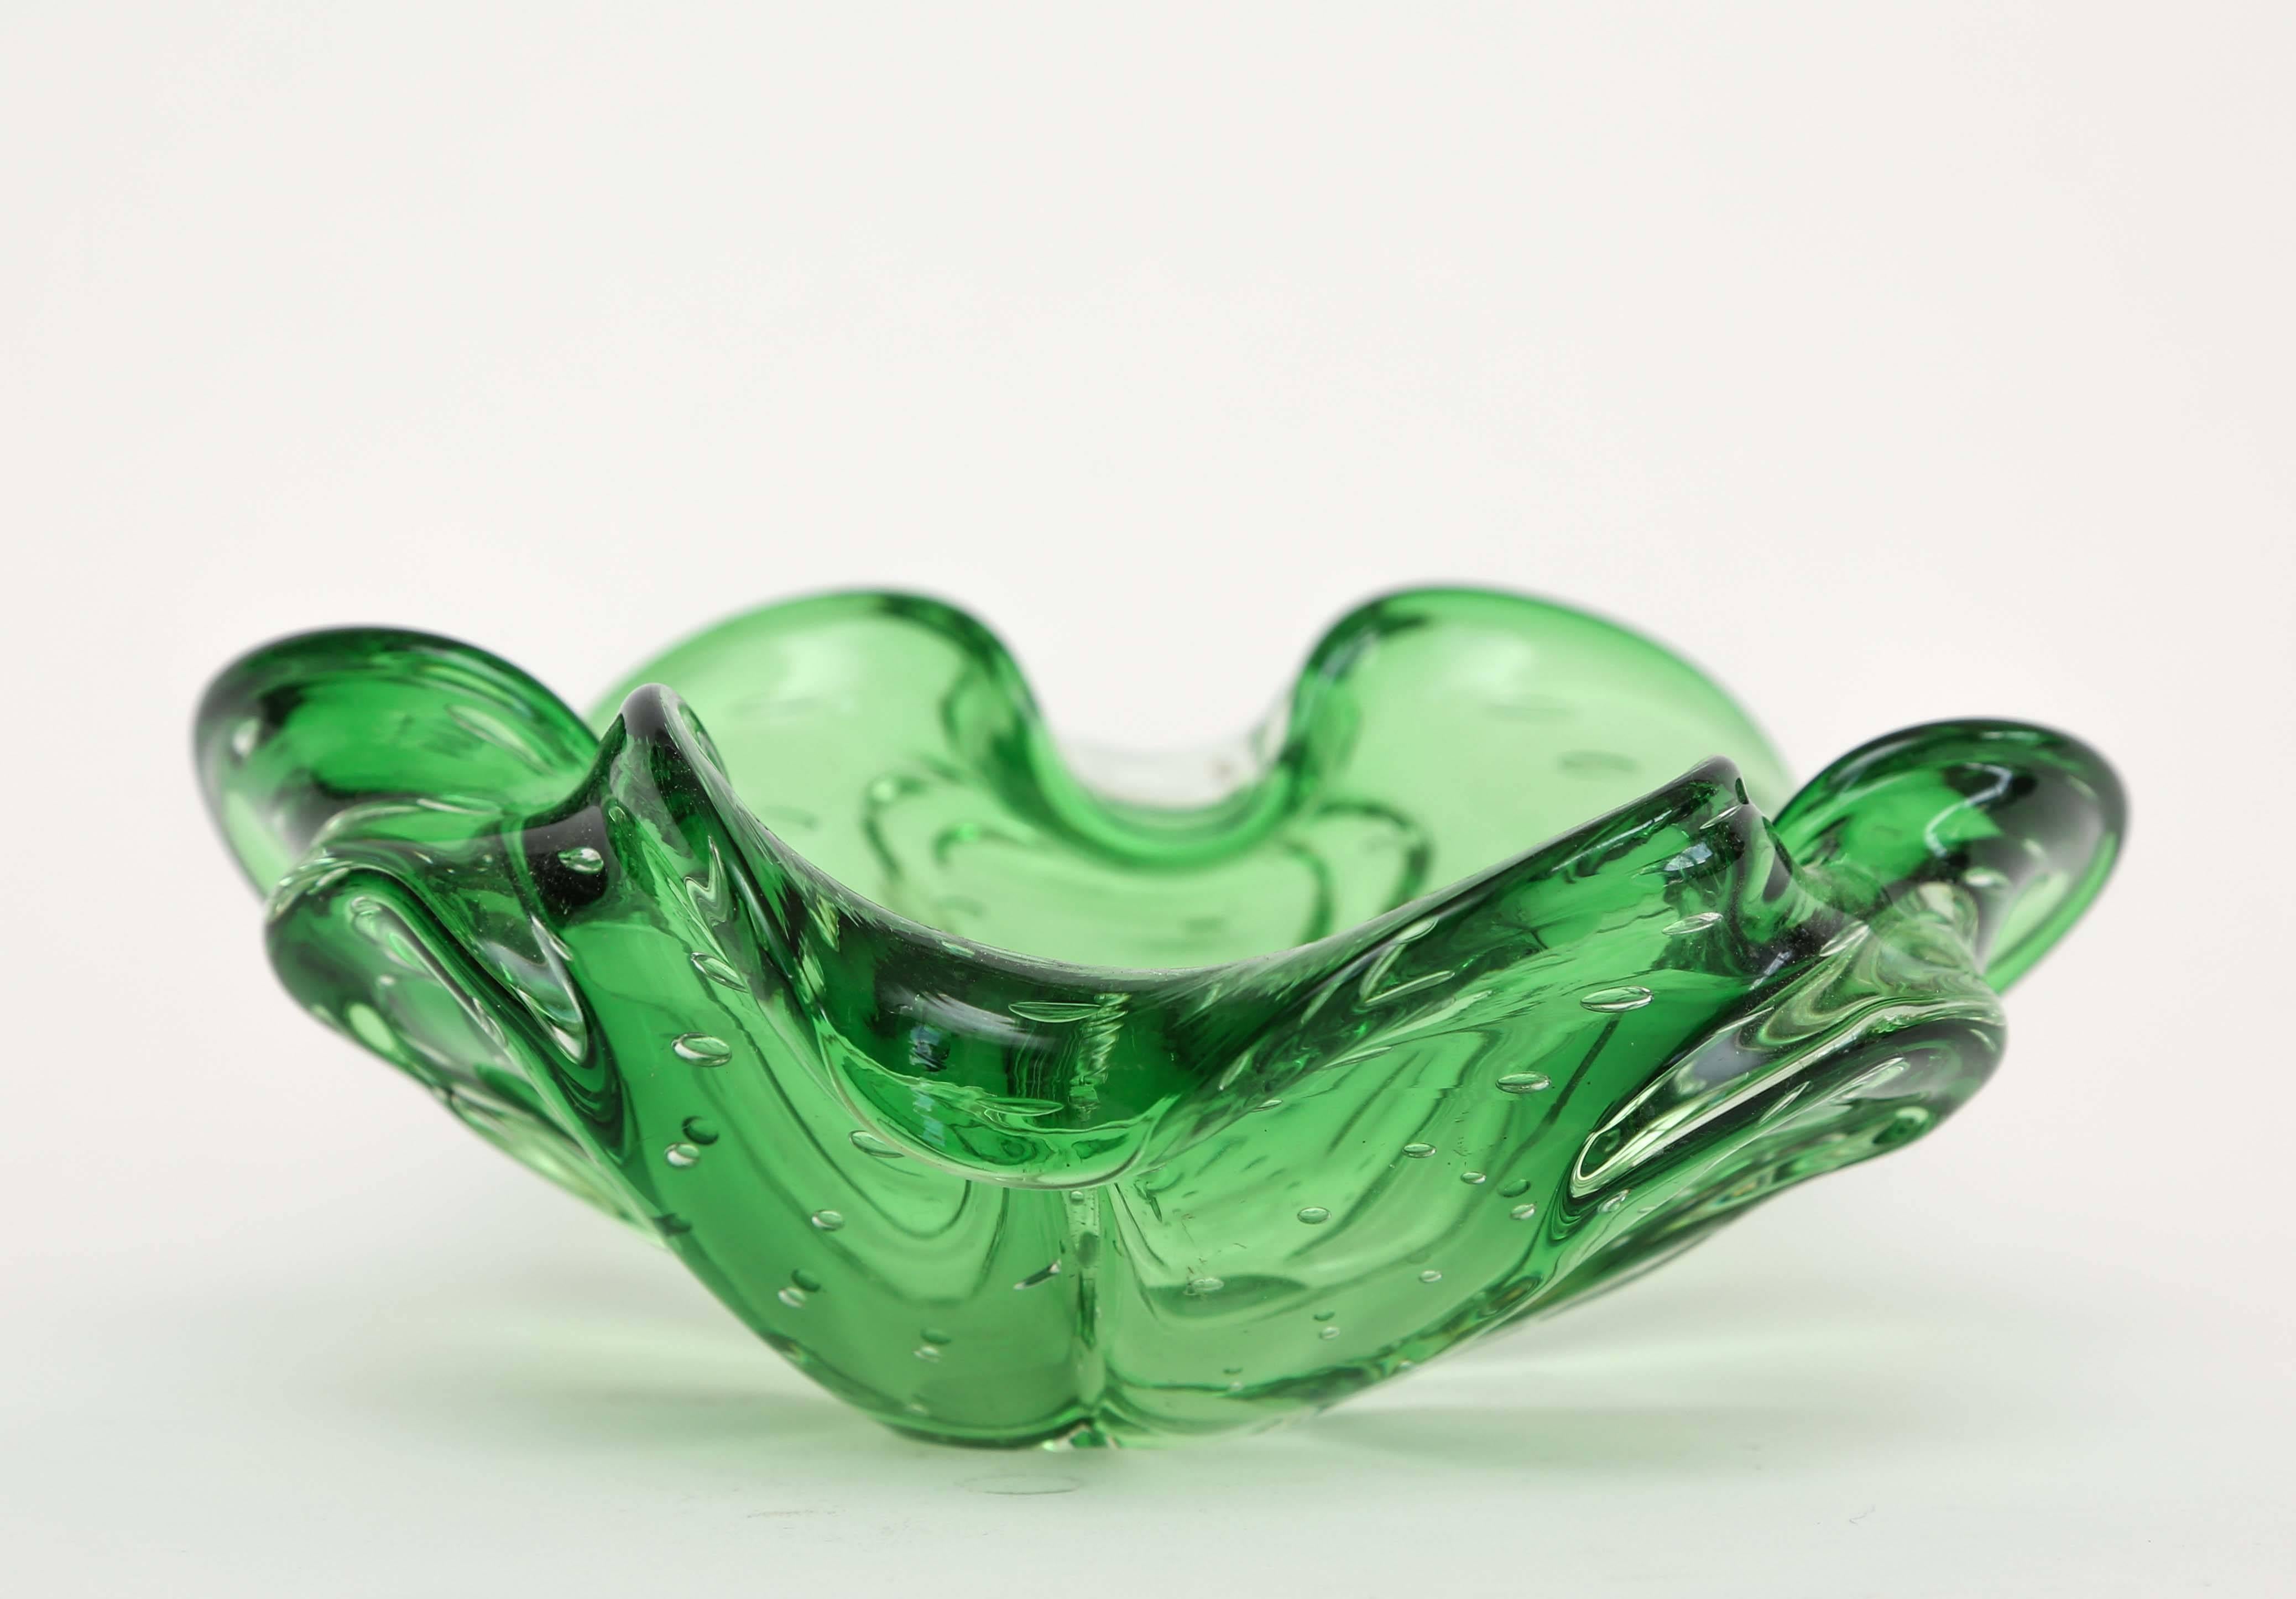 Gorgeous decorative bowl or dish in Murano glass, 1960s, Italy.